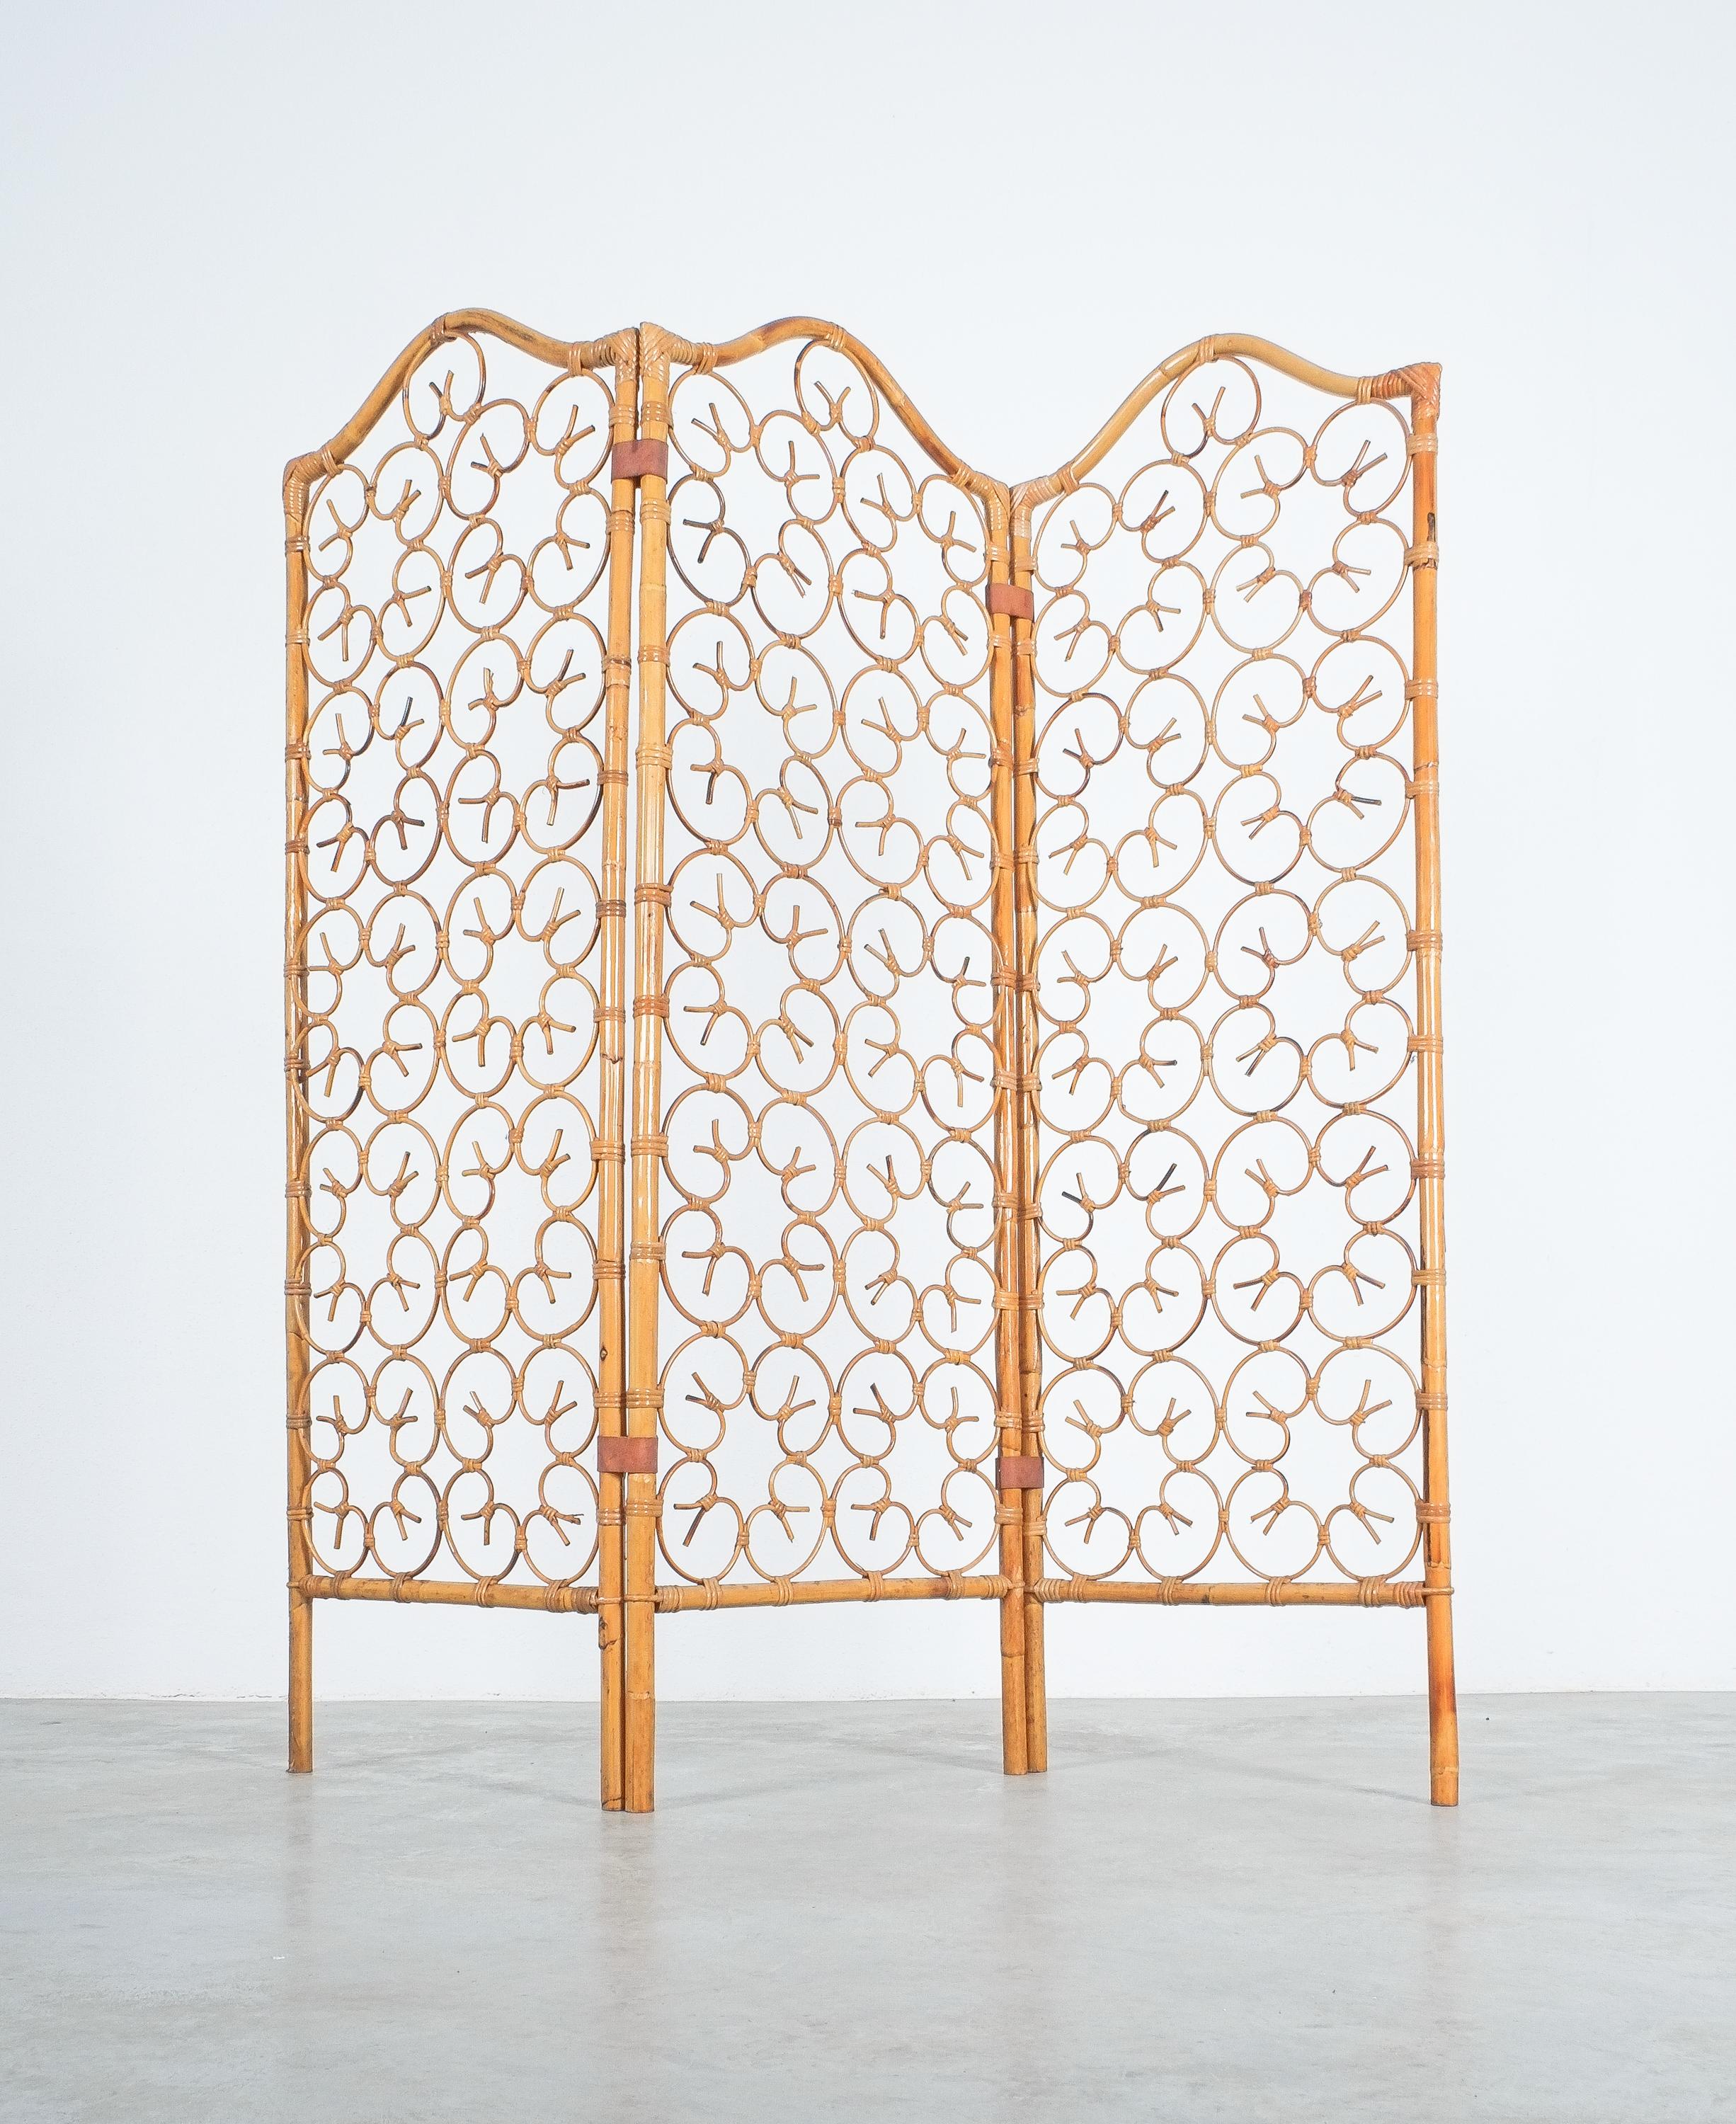 Rattan bamboo room divider screen Paravant Italy, circa 1965

Ornamental handmade screen from 3 panels made from bent bamboo and rattan pieces held together with leather 'clamps'. In the grand picture they are form a beautiful large ornament. It's